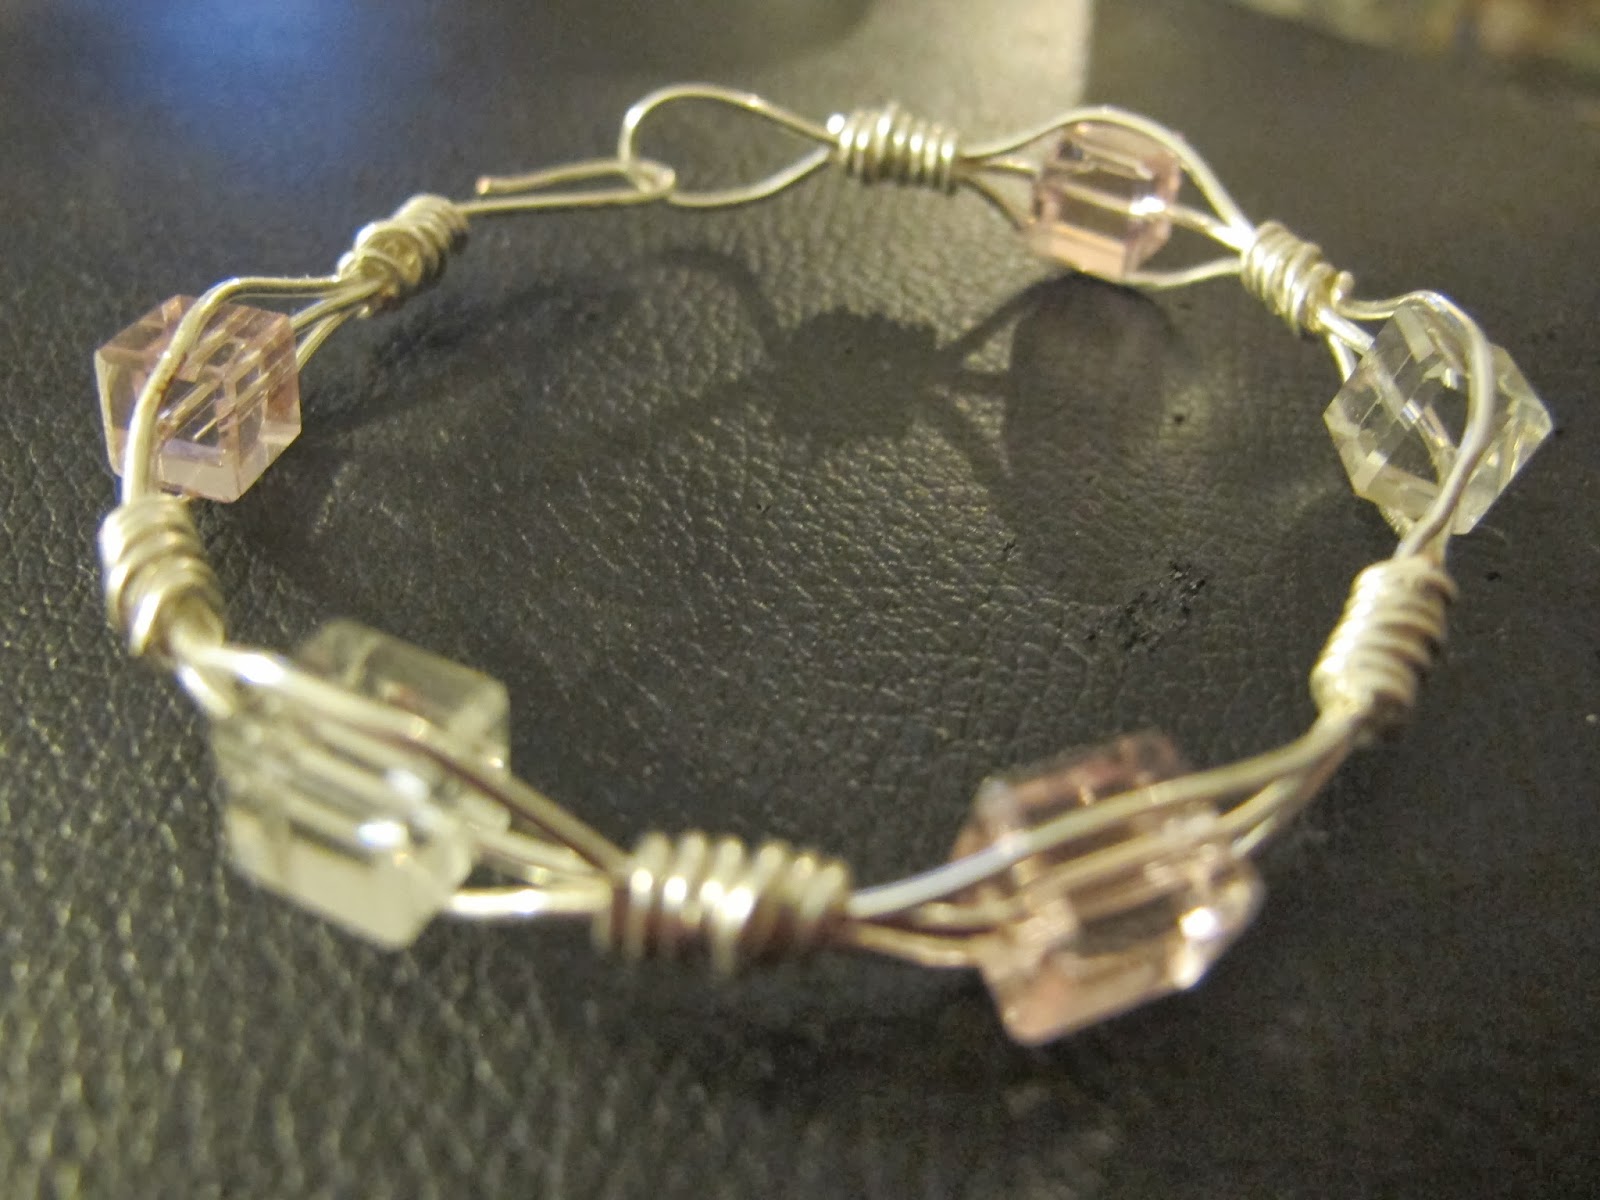 Naomis Designs Handmade Wire Jewelry Photo Gallery Wire Wrapped